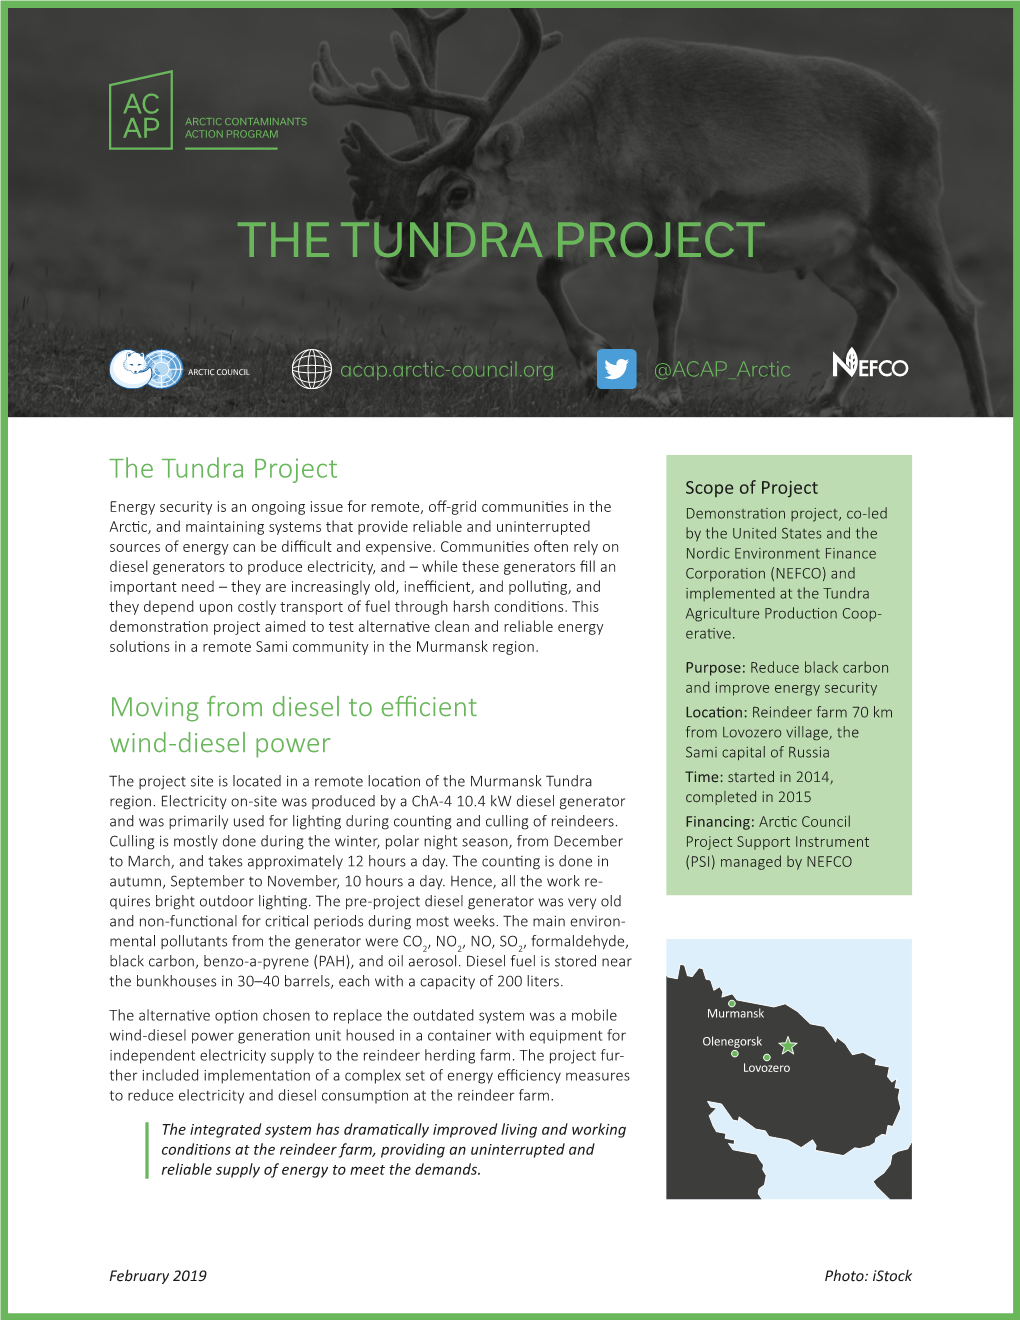 The Tundra Project